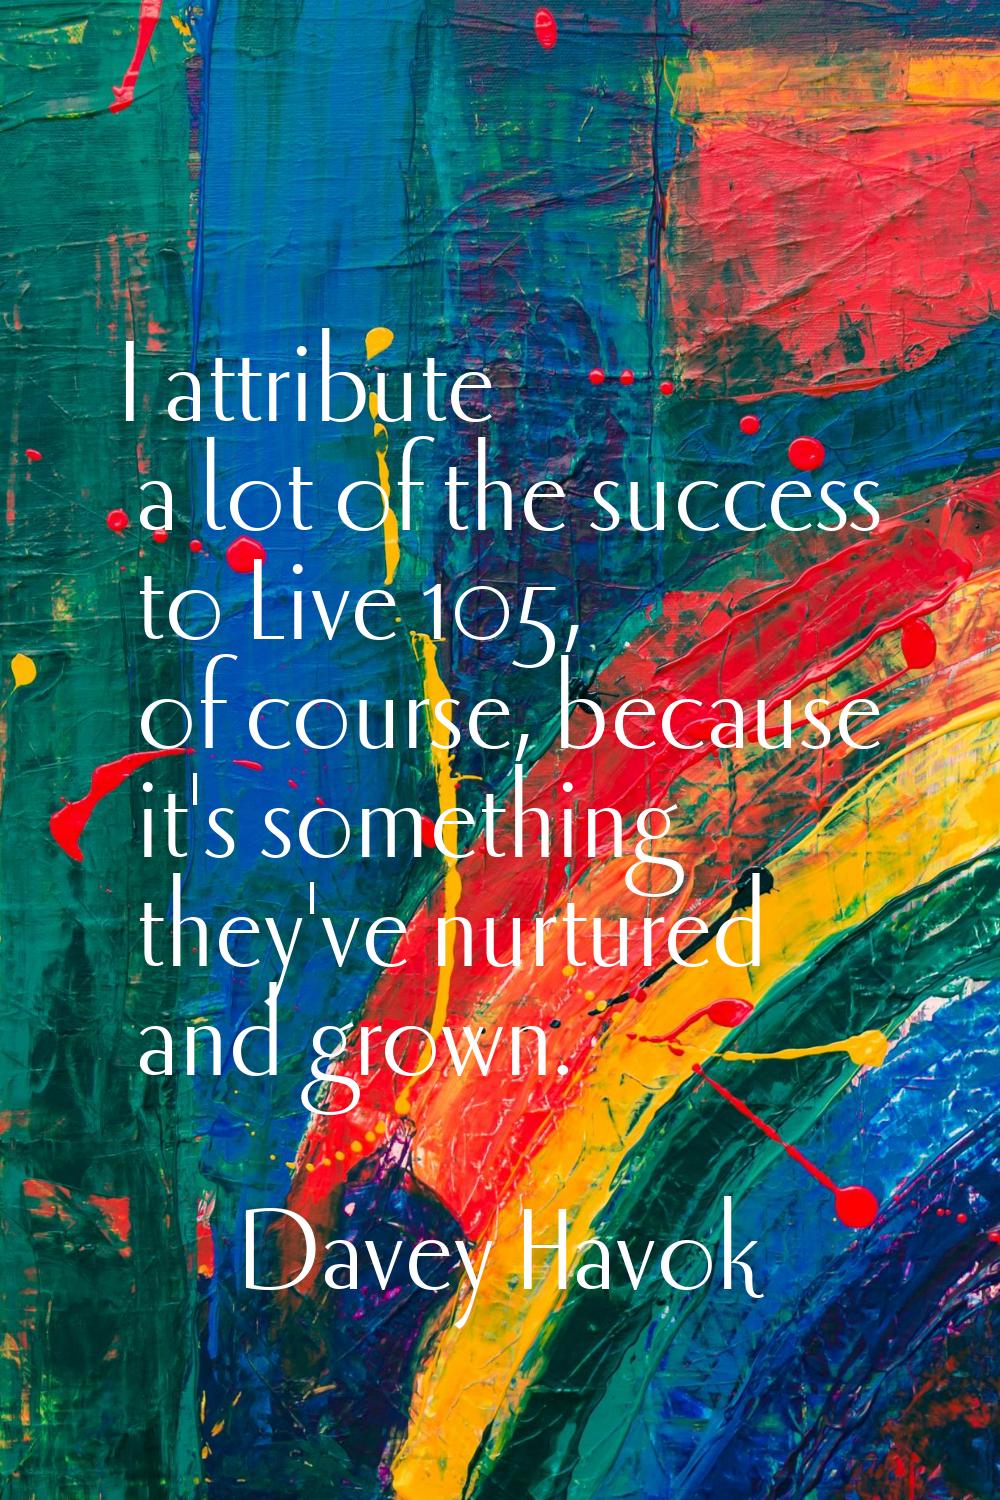 I attribute a lot of the success to Live 105, of course, because it's something they've nurtured an